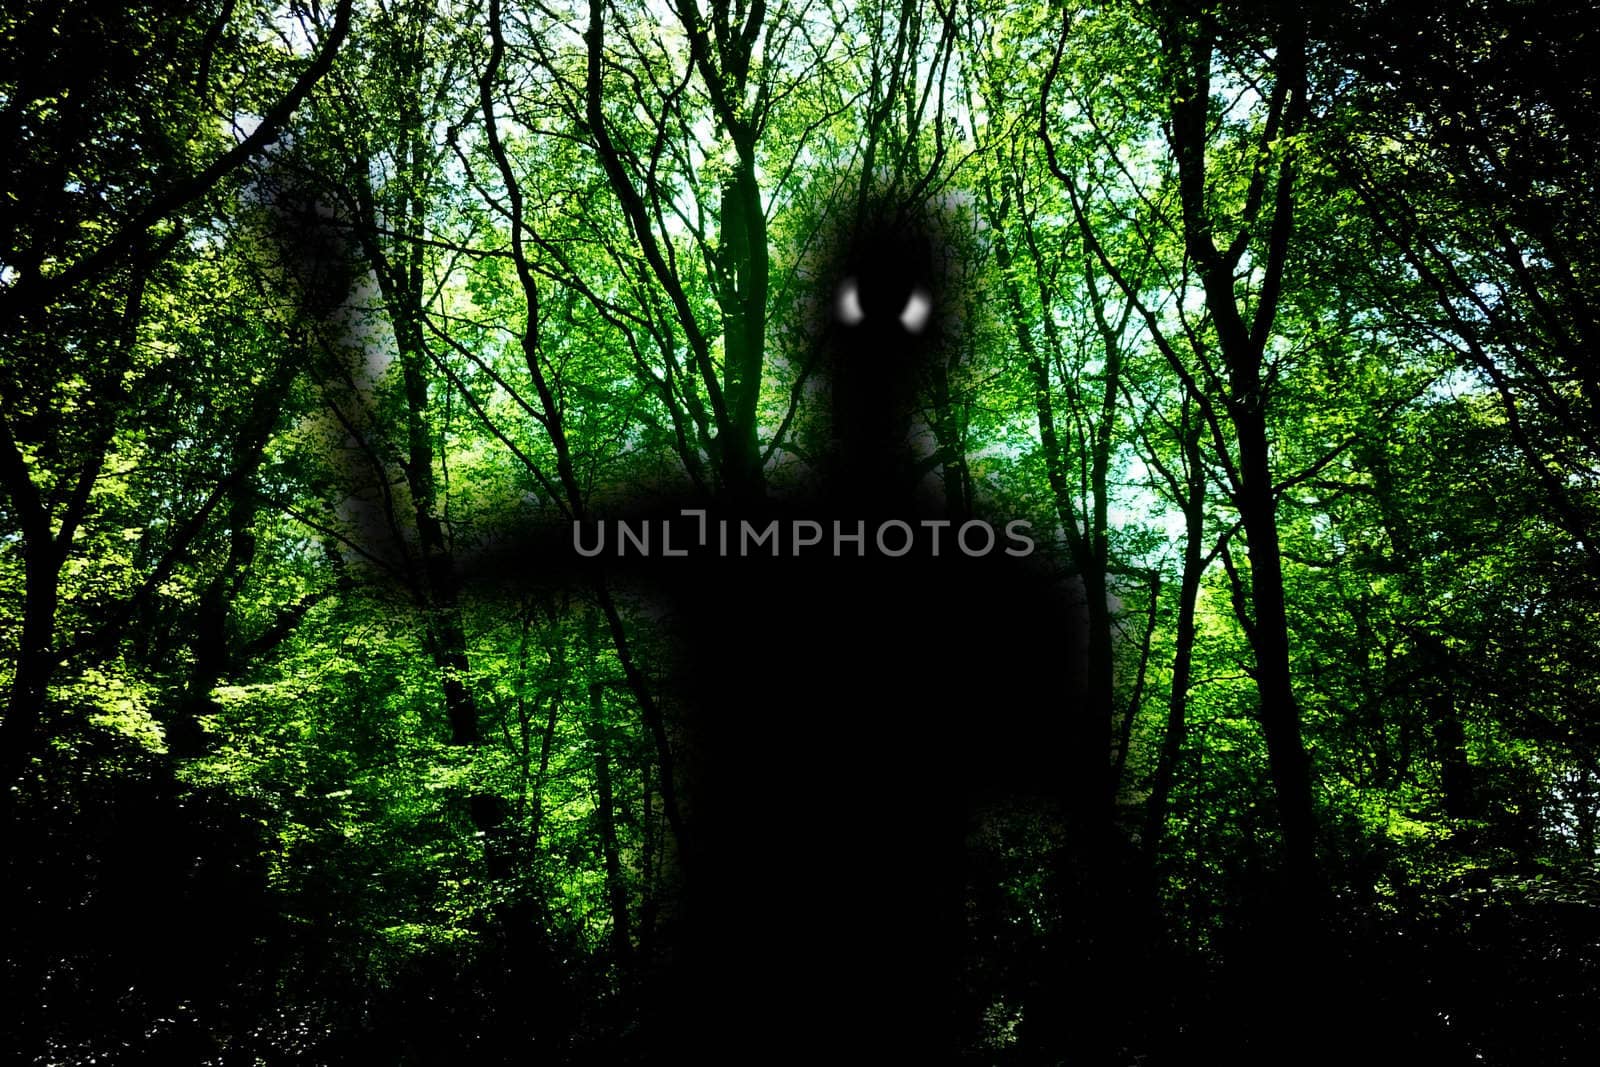 A representation of a ghost in some dark woods.